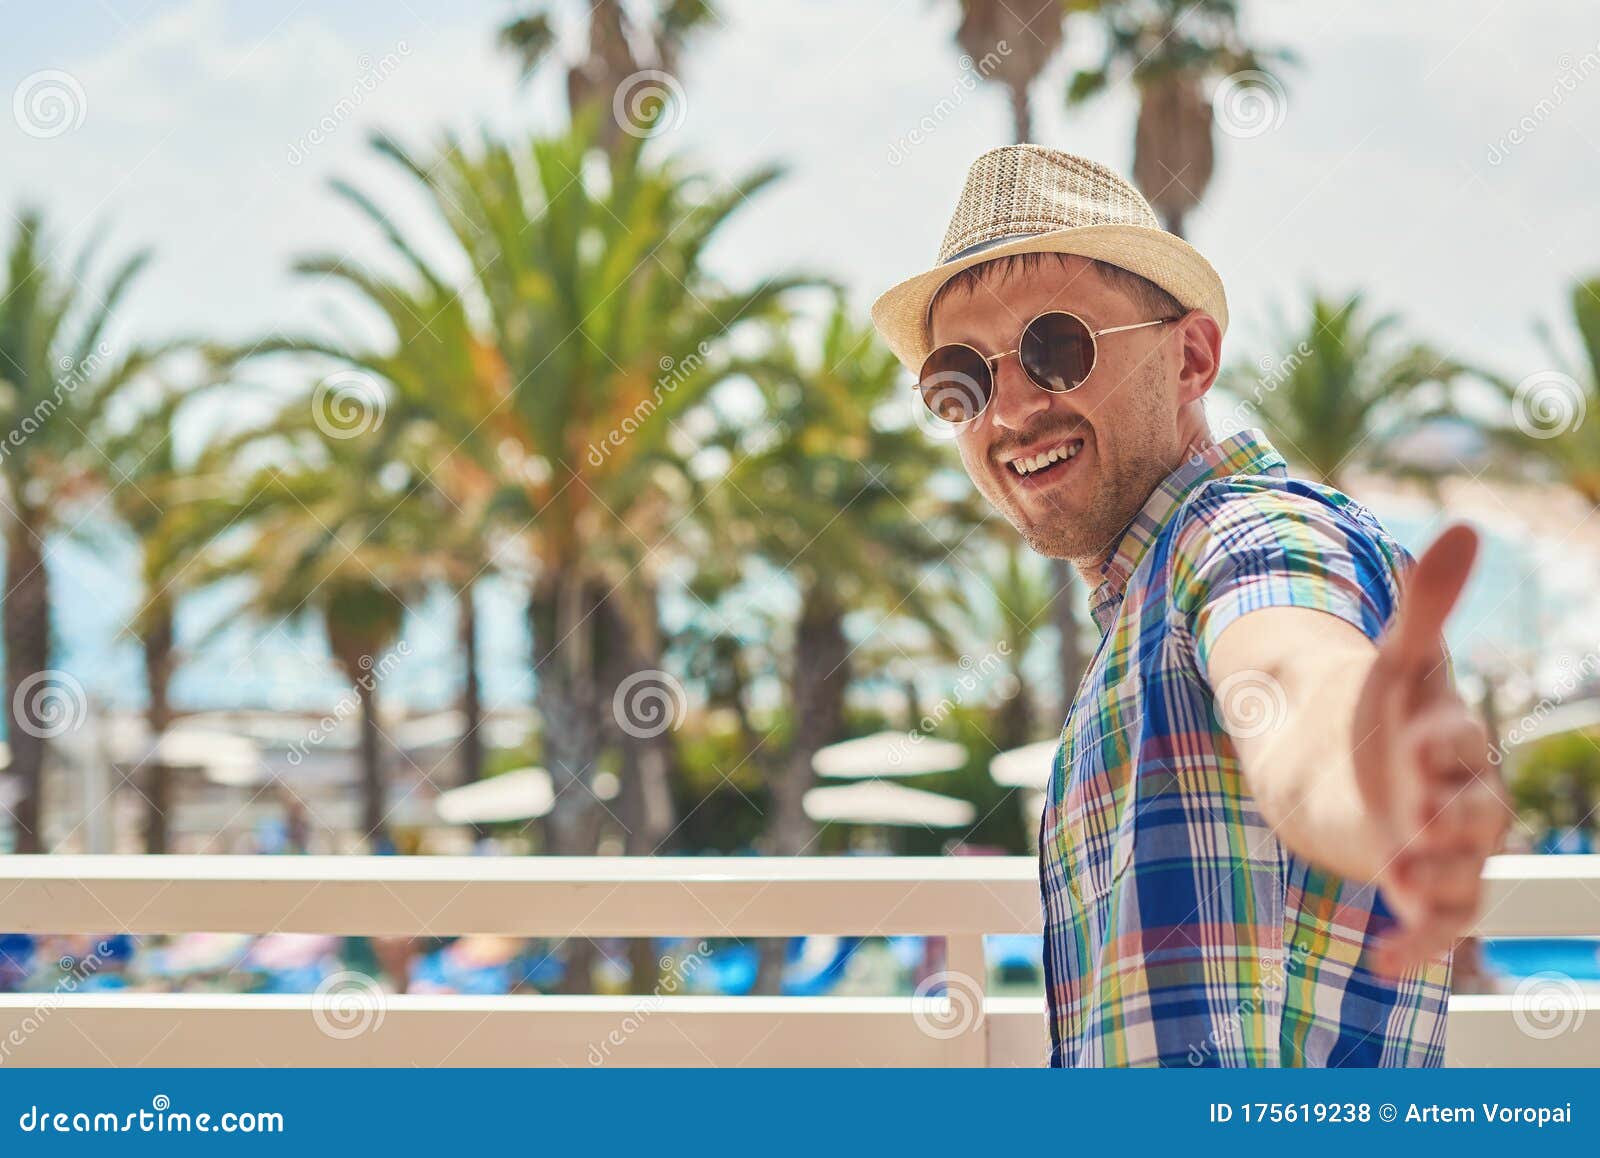 man in watching to camera while holding his arms wide open against amazing view